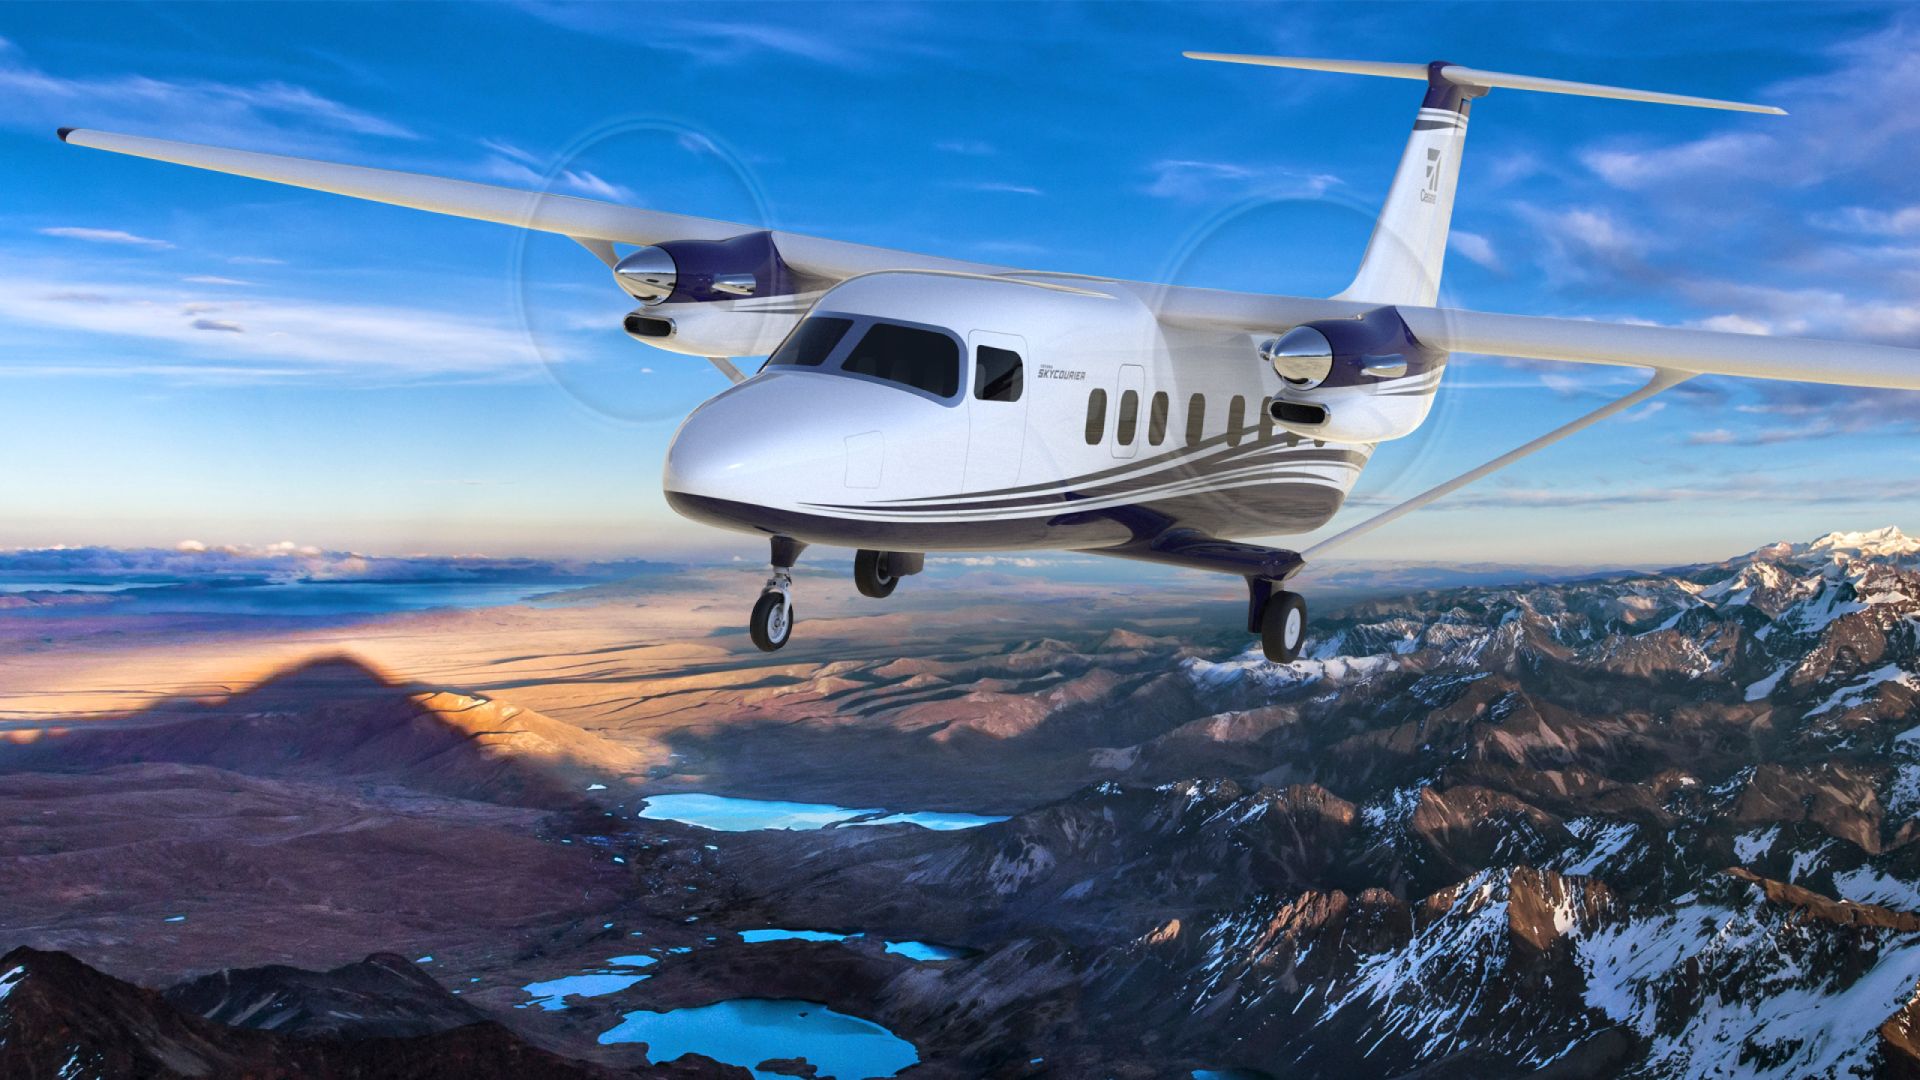 Textron Aviation unveils new large-utility turboprop, the Cessna SkyCourier